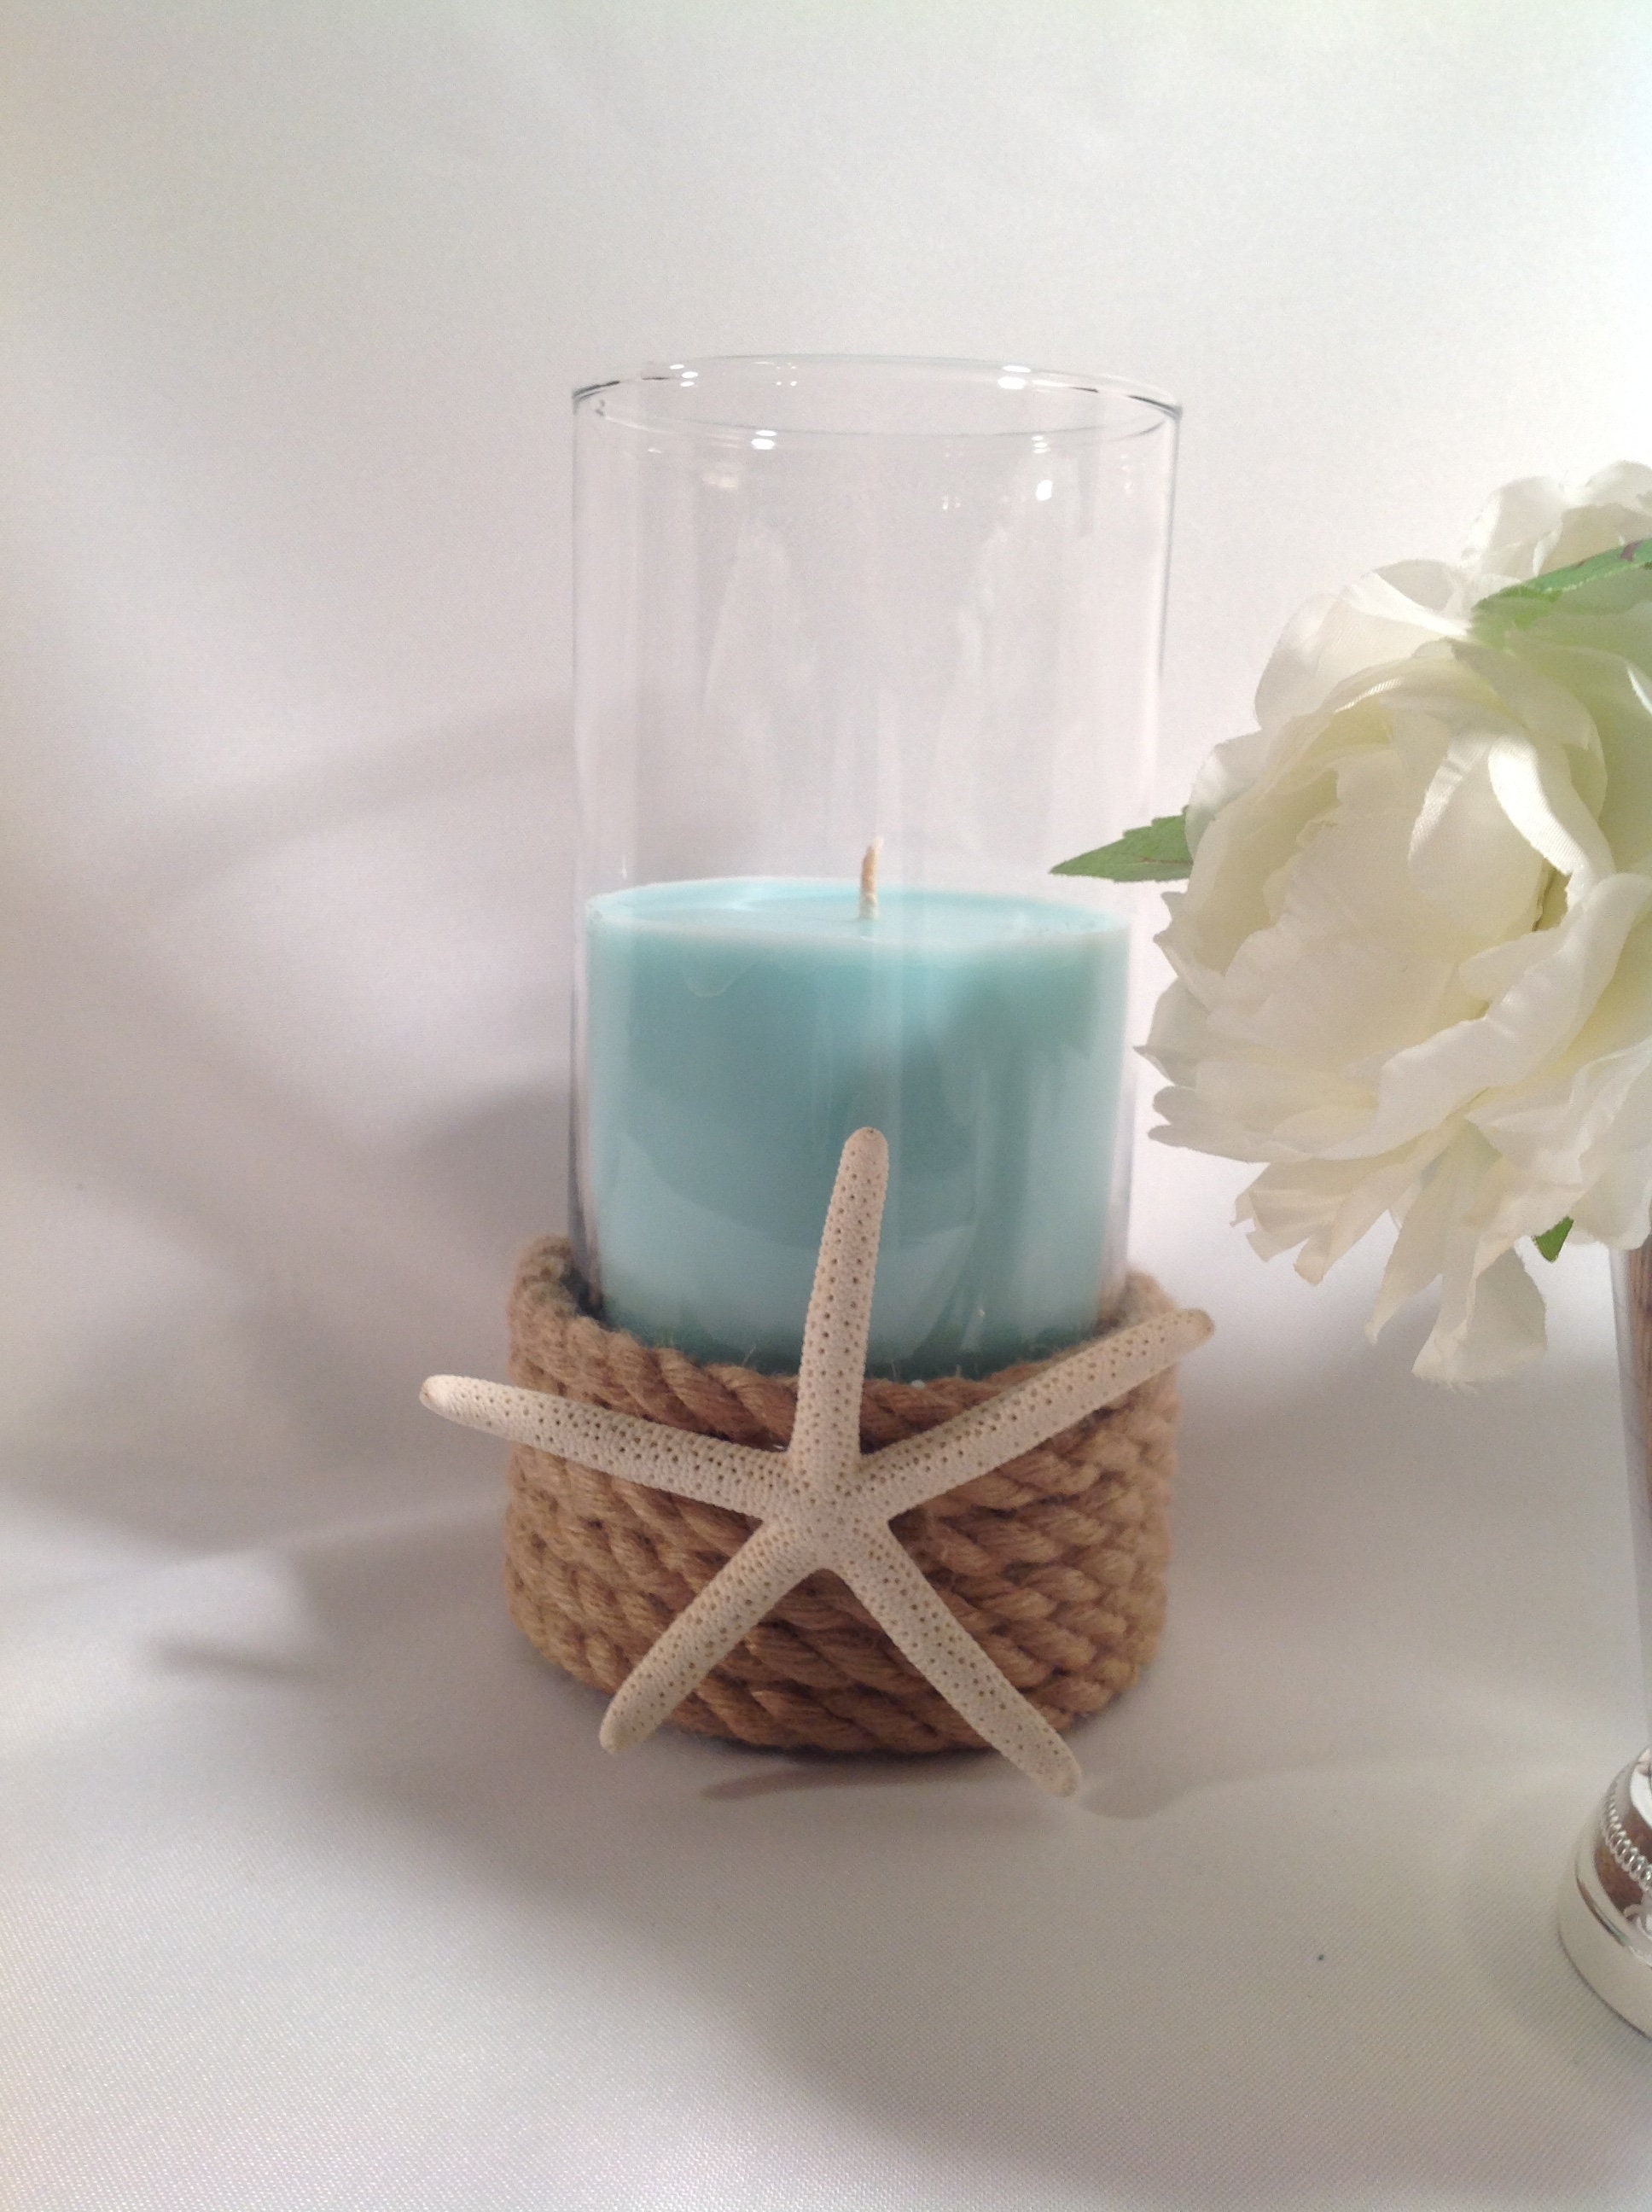  SAILINGSTORY Glass Fishing Float Tealight Candle Holder  Nautical Coastal Decor Beach Bathroom Decor Votive Candle Holder Teal and  Blue Set of 2 Pack : Home & Kitchen